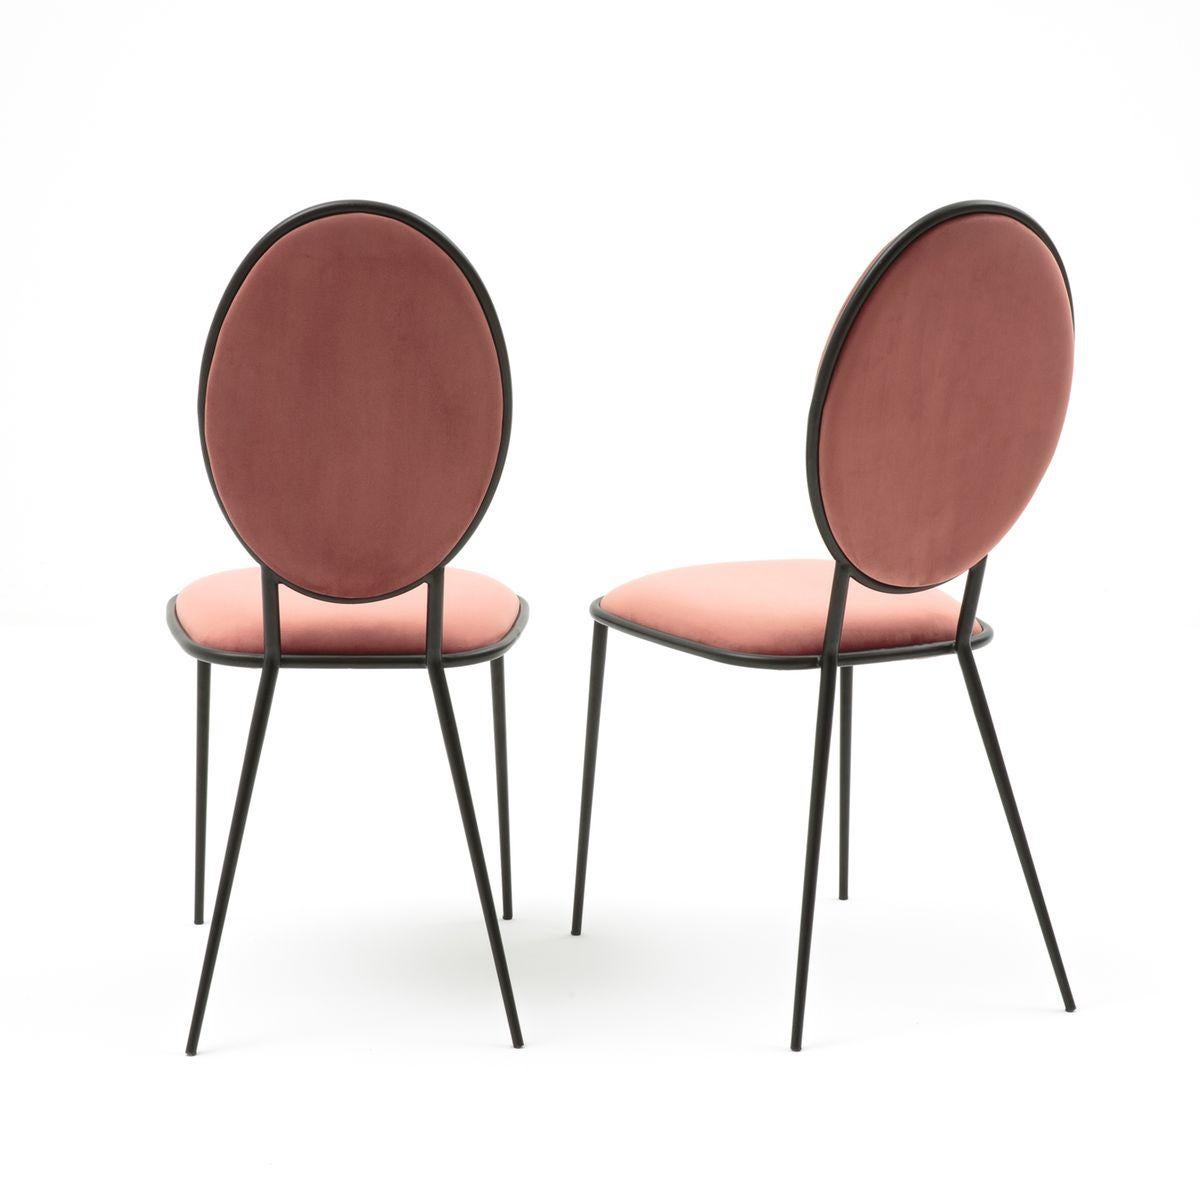 Available as a set of 8, these dining chairs are a fabulous modern interpretation of the Classic medallion chair. A stylish, refined design the sleek and modern shape makes it suitable for either a contemporary or Classic interior.

The chair has